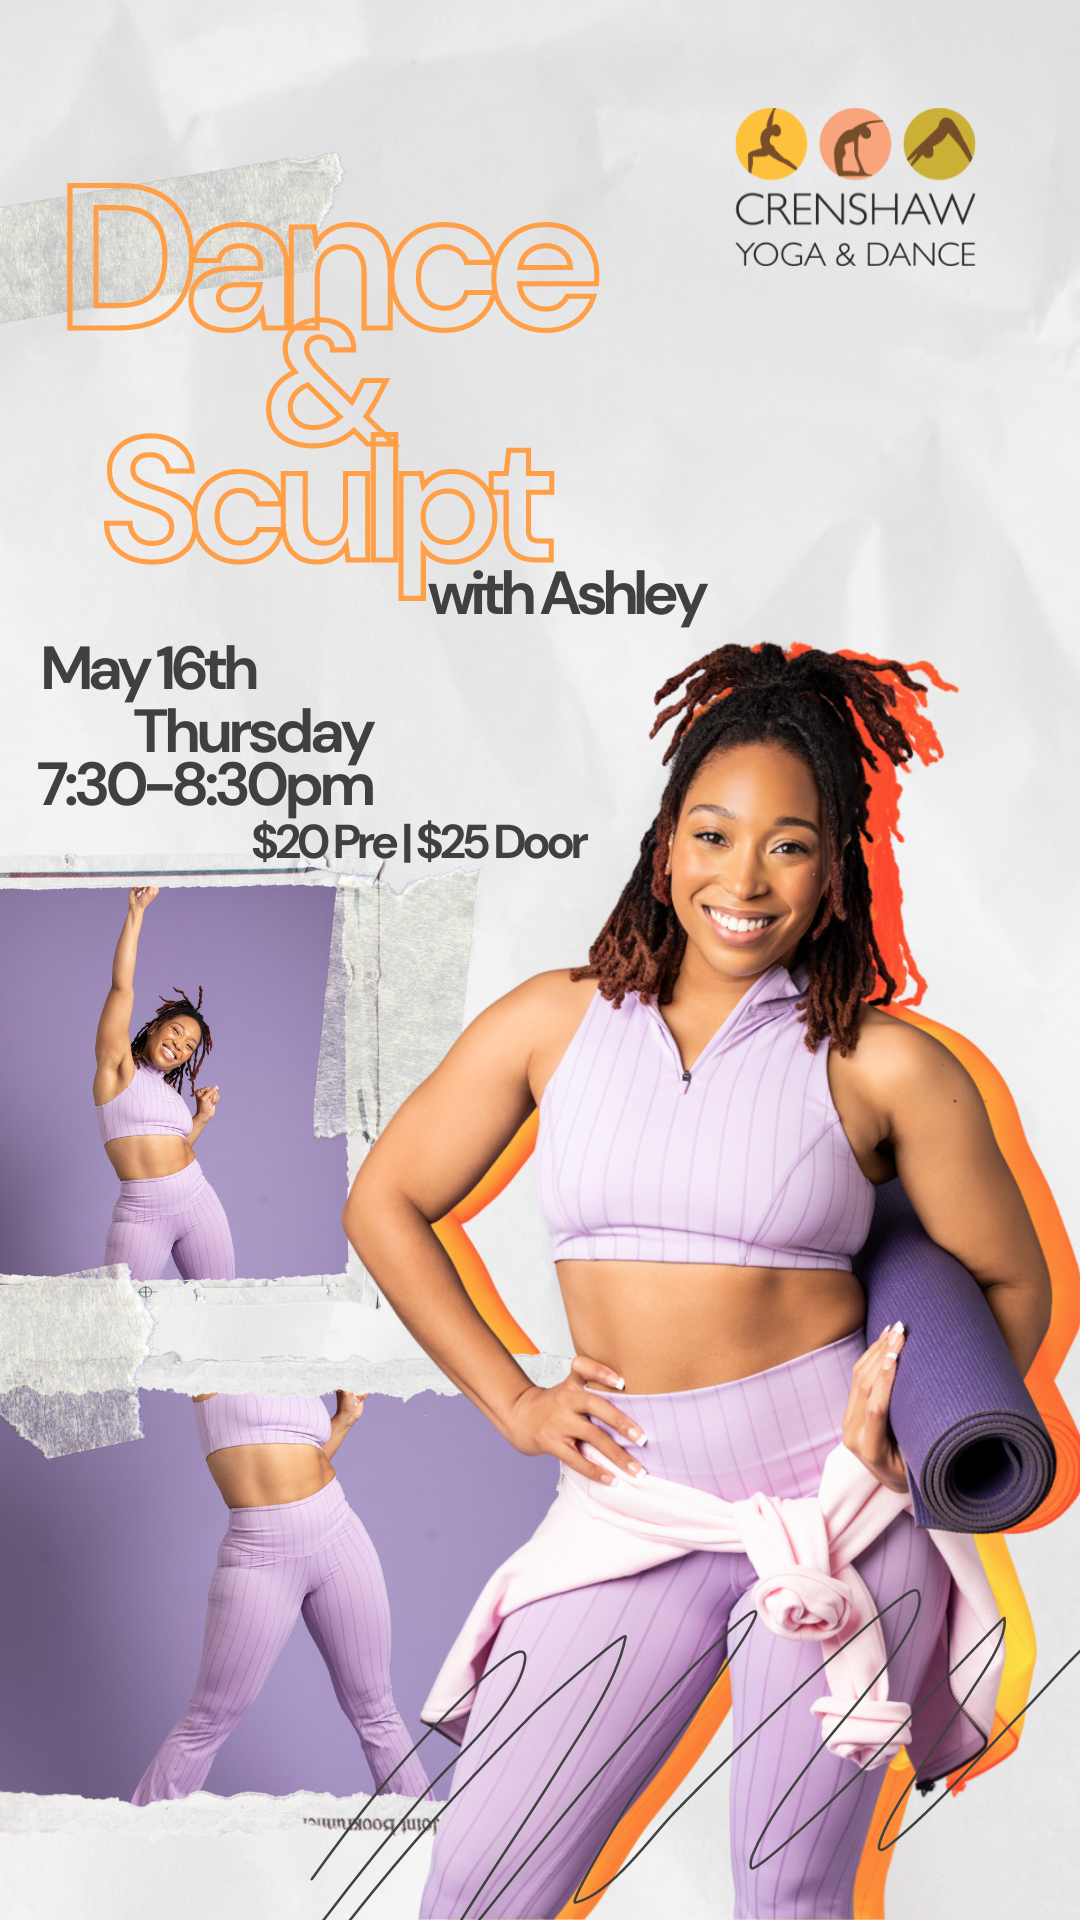 Let's Dance and Sculpt Thursday, May 16th 7:30pm with Ashley.  Presale $20/ Door $25